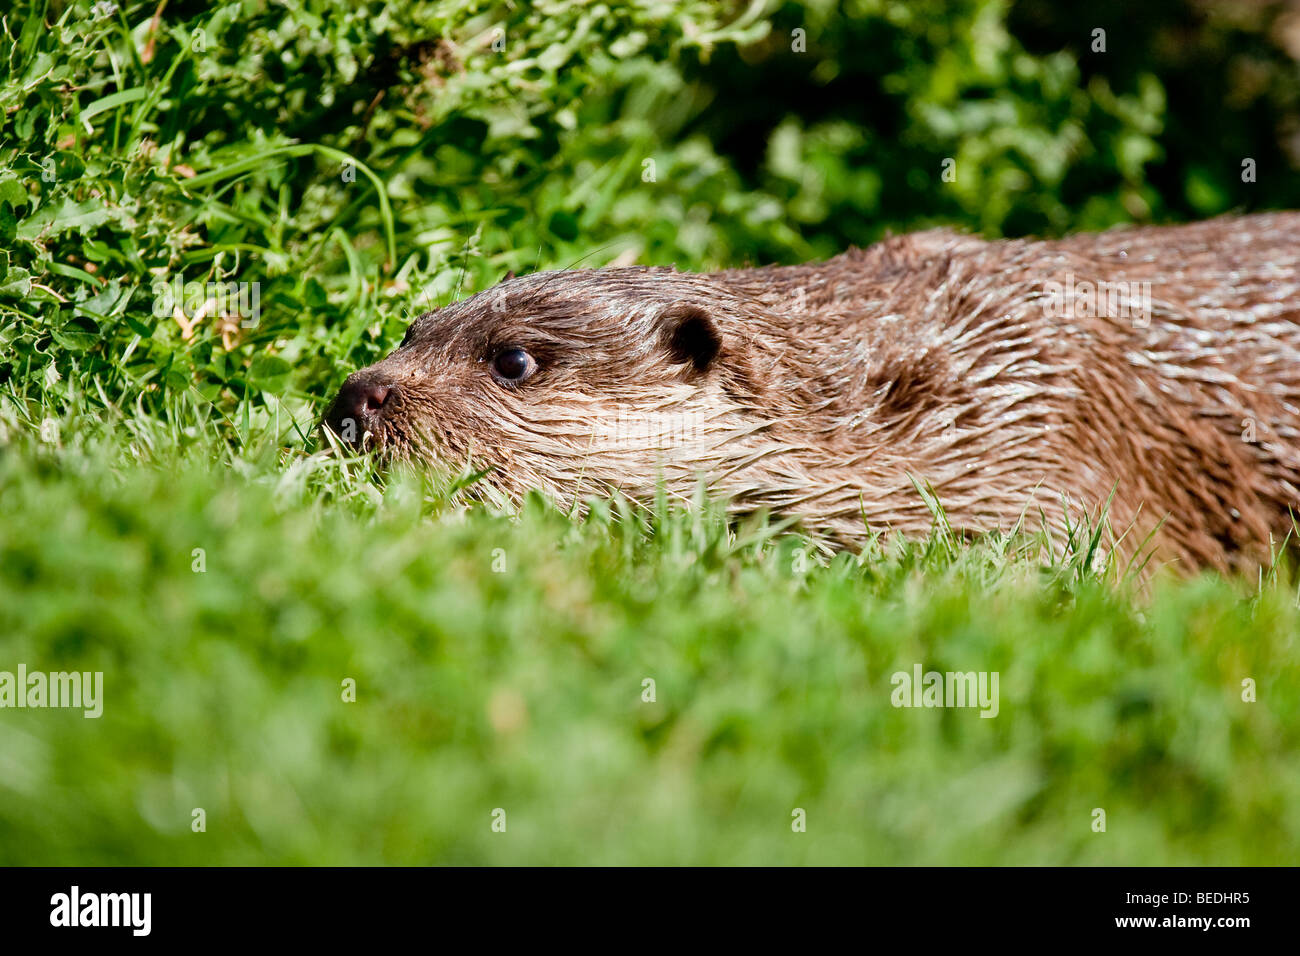 Otter, lutra lutra Stock Photo